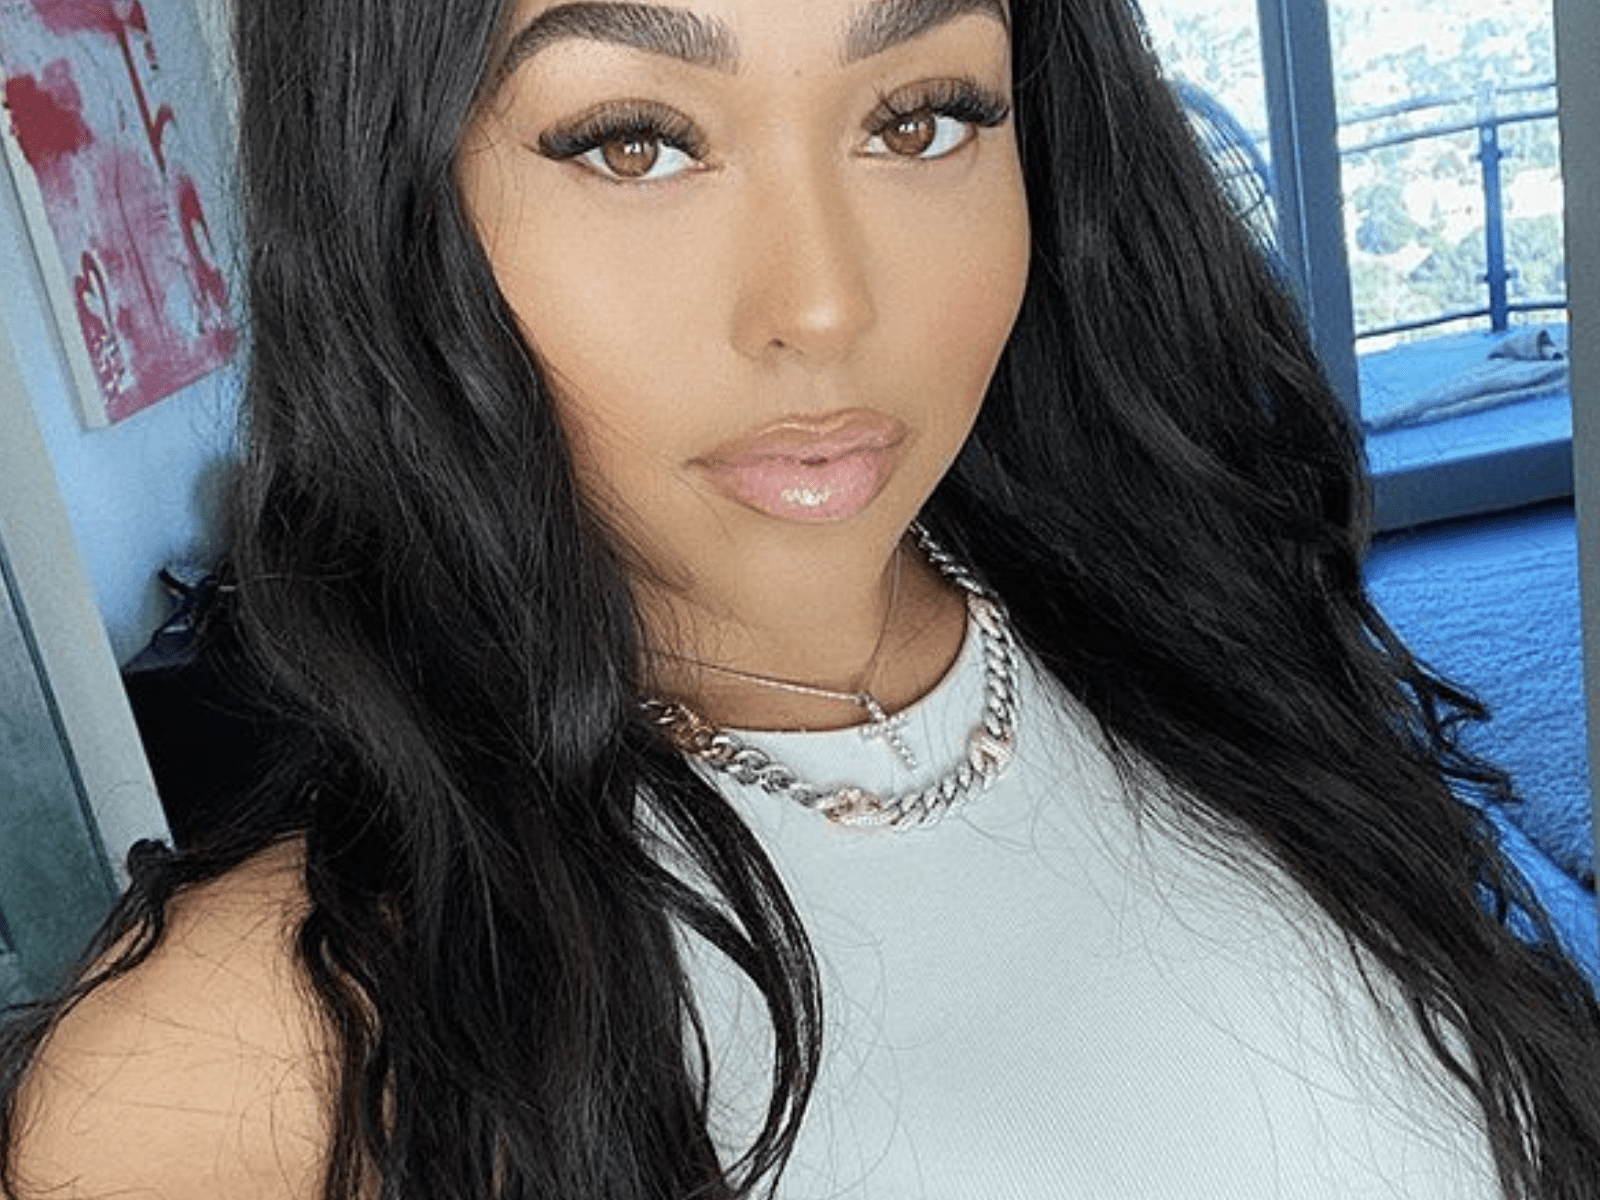 Jordyn Woods Reveals Her Original Chicken Wing Recipe - Check Out Her First Cooking Video